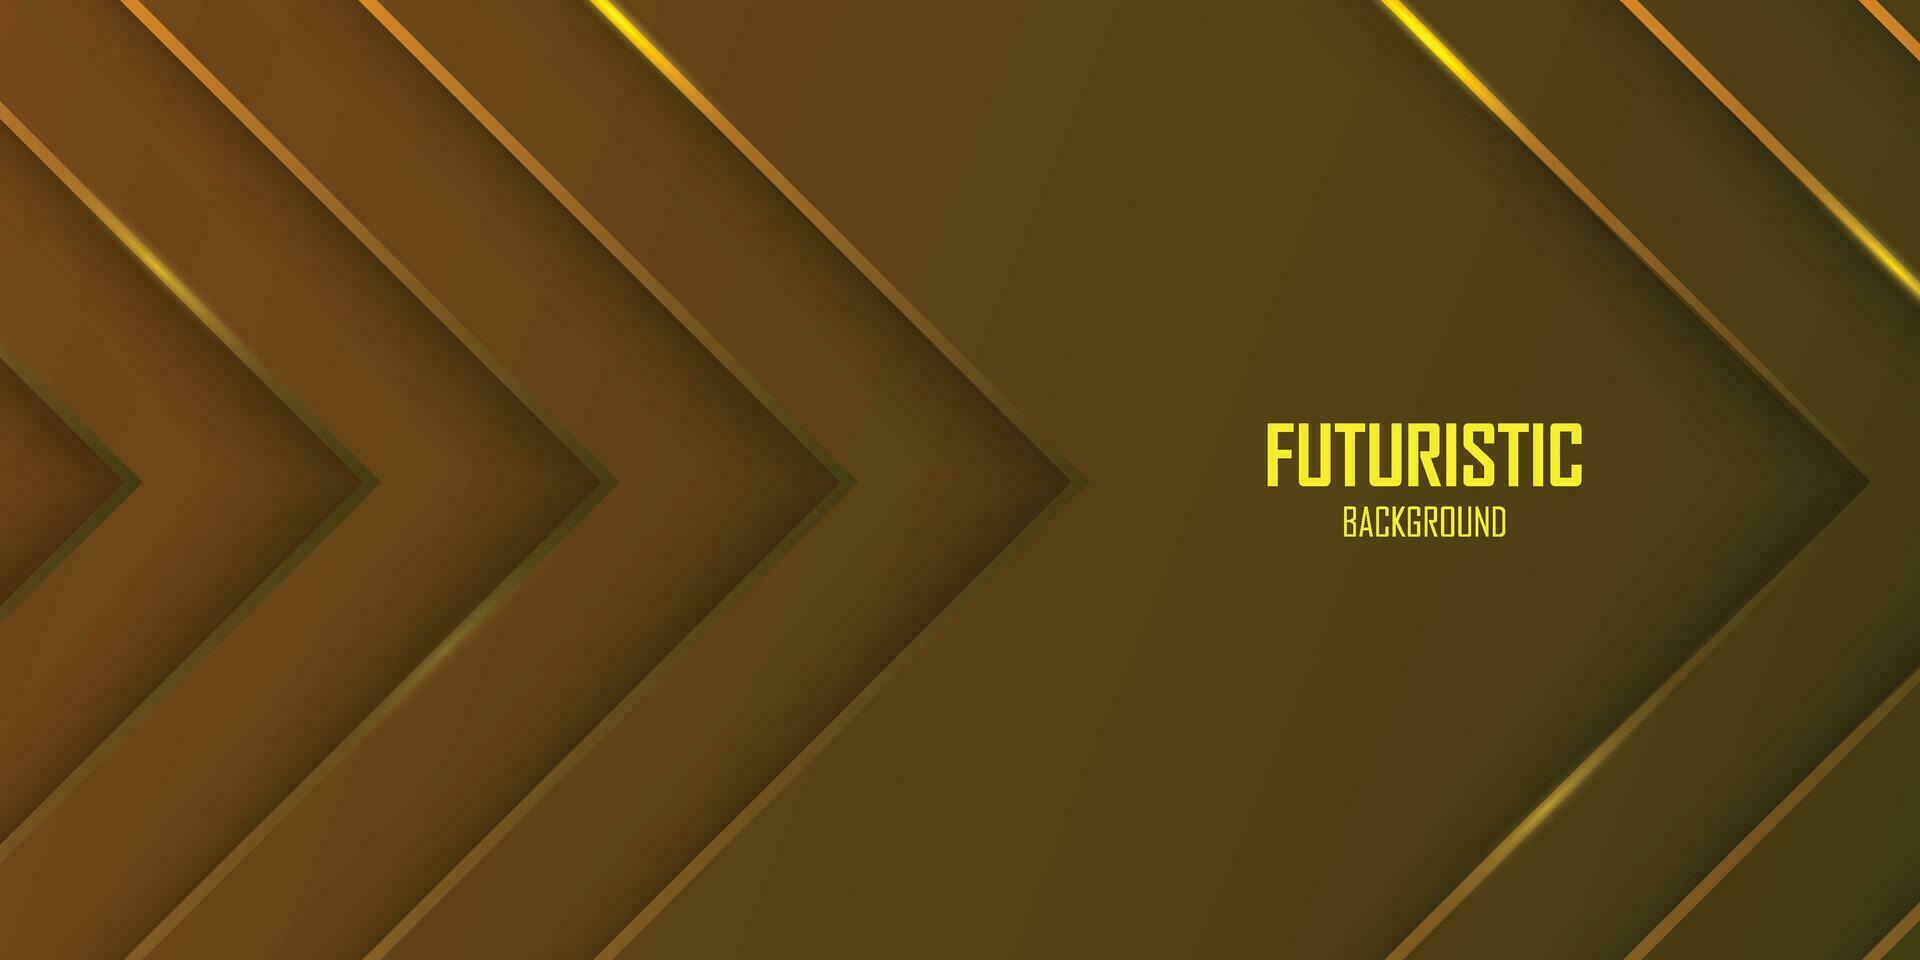 Futuristic dark yellow abstract background with gold lines and shadow, geometric shape overlap layers, graphic pattern banner template design vector